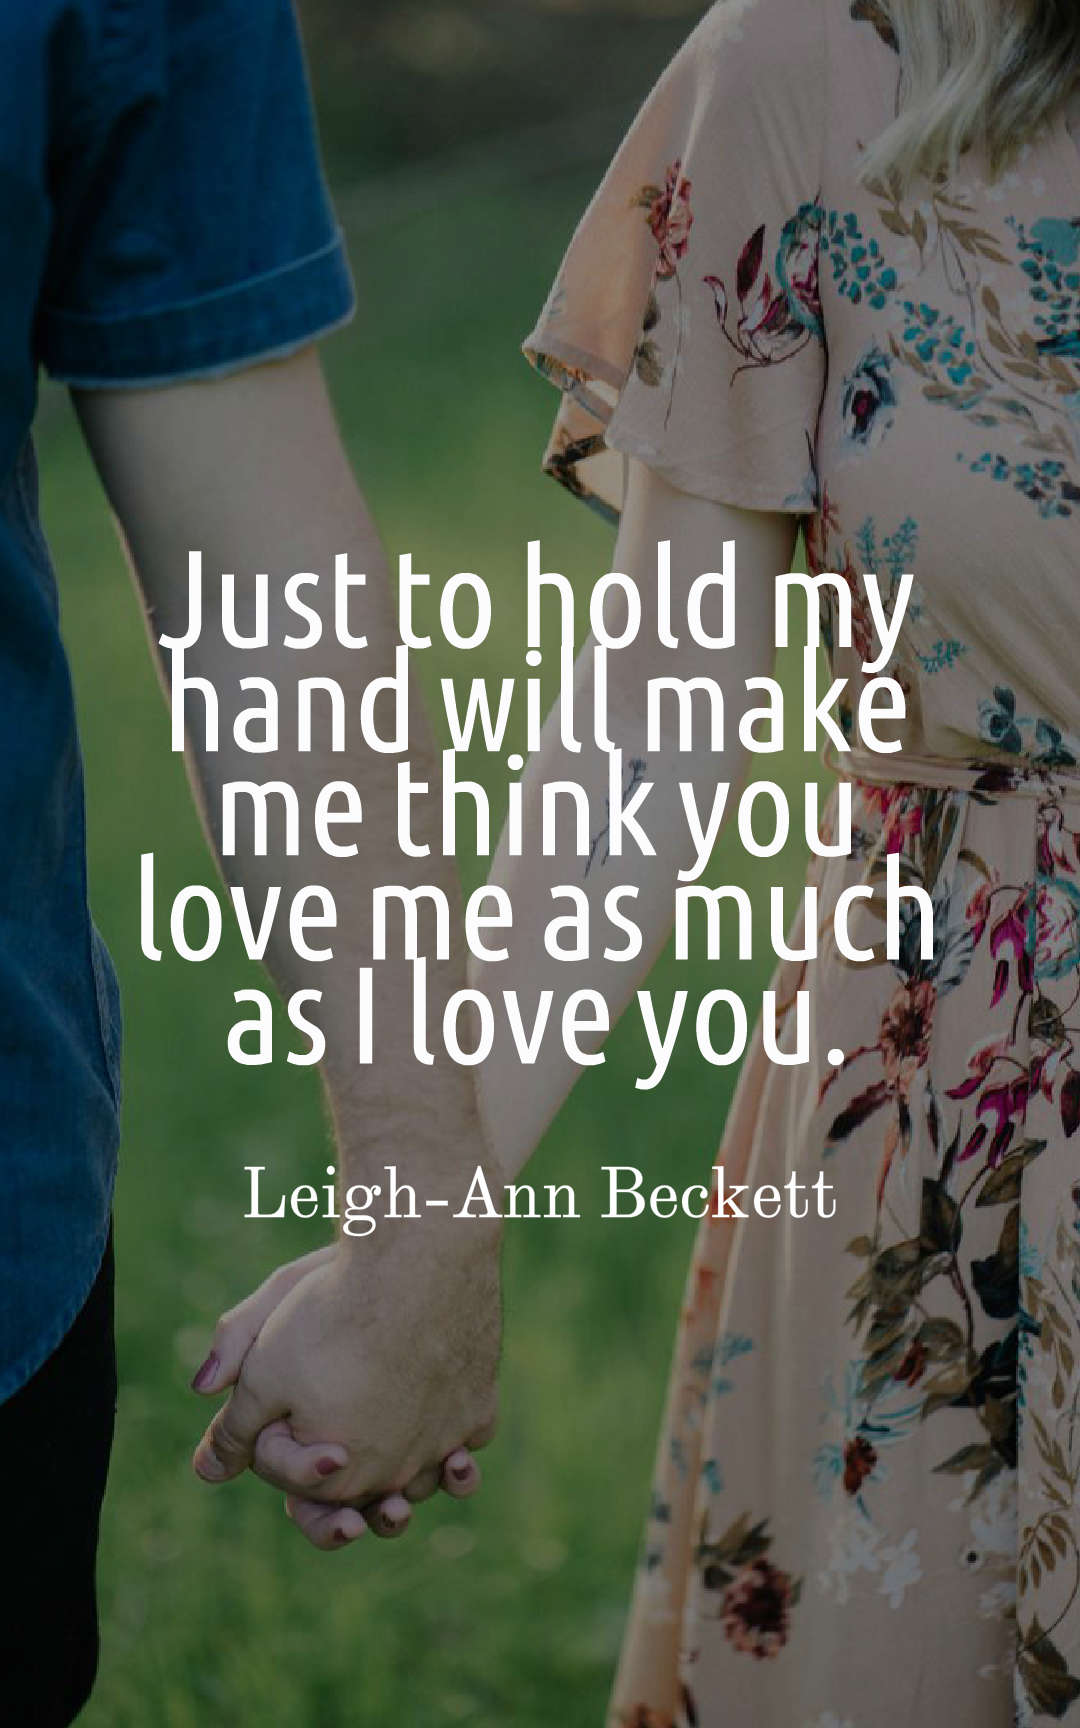 Just to hold my hand will make me think you love me as much as I love you.